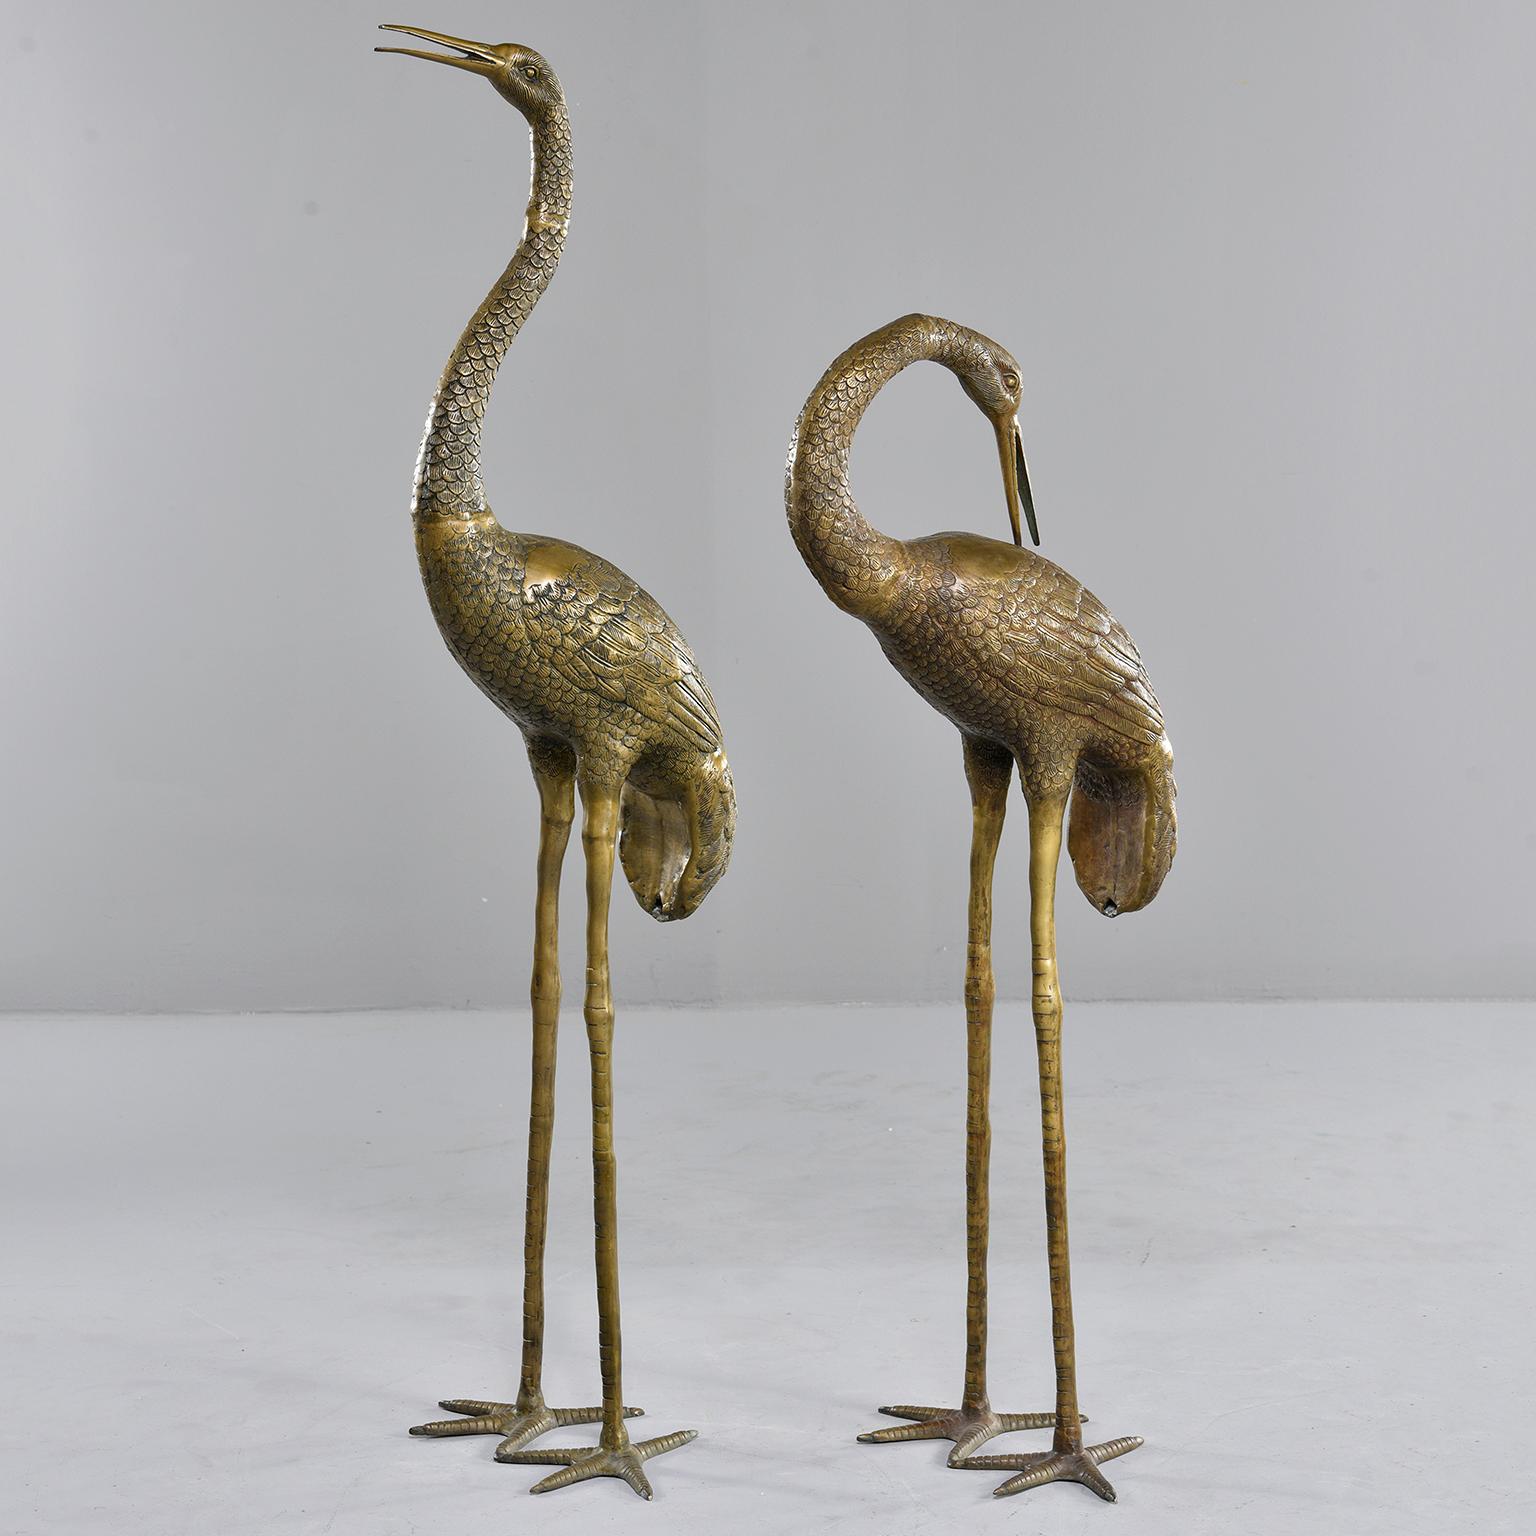 Extra large pair of cast brass crane sculptures, circa 1960s. Unknown maker. Sold and priced as a pair. Measurements shown are for the taller crane. Smaller crane measures: 47” high x 17” wide x 16.5” deep.